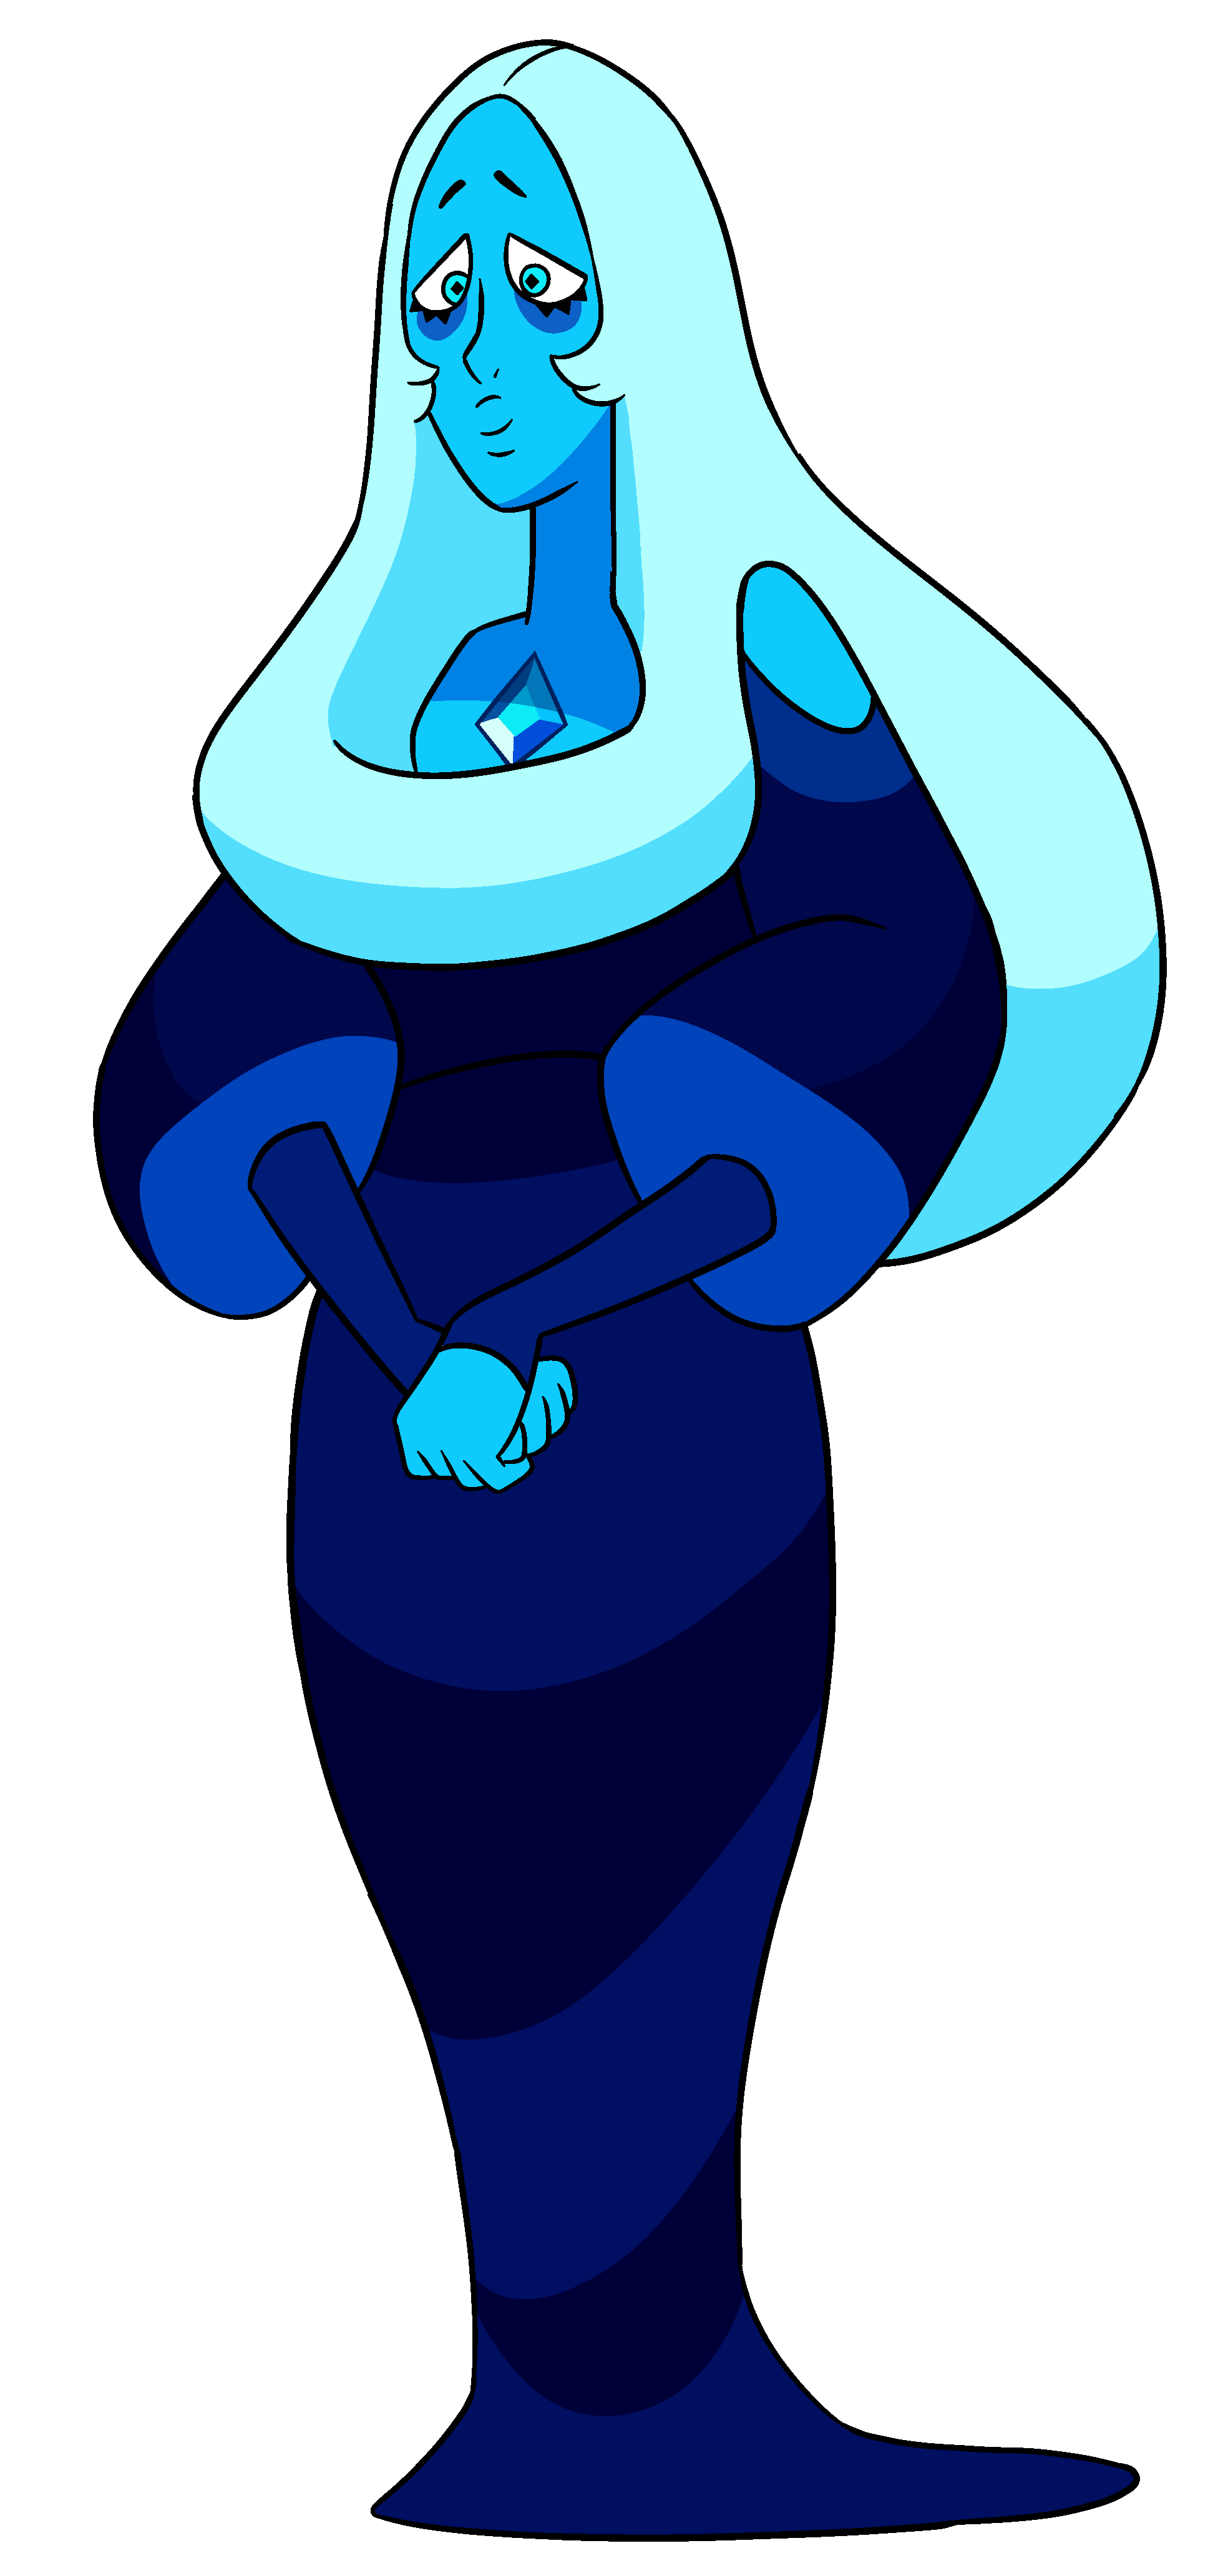 https://static.wikia.nocookie.net/characterprofile/images/b/ba/Blue_Diamond_%28S5%29_by_RylerGamerDBS.png/revision/latest/scale-to-width-down/1960?cb=20201017163029